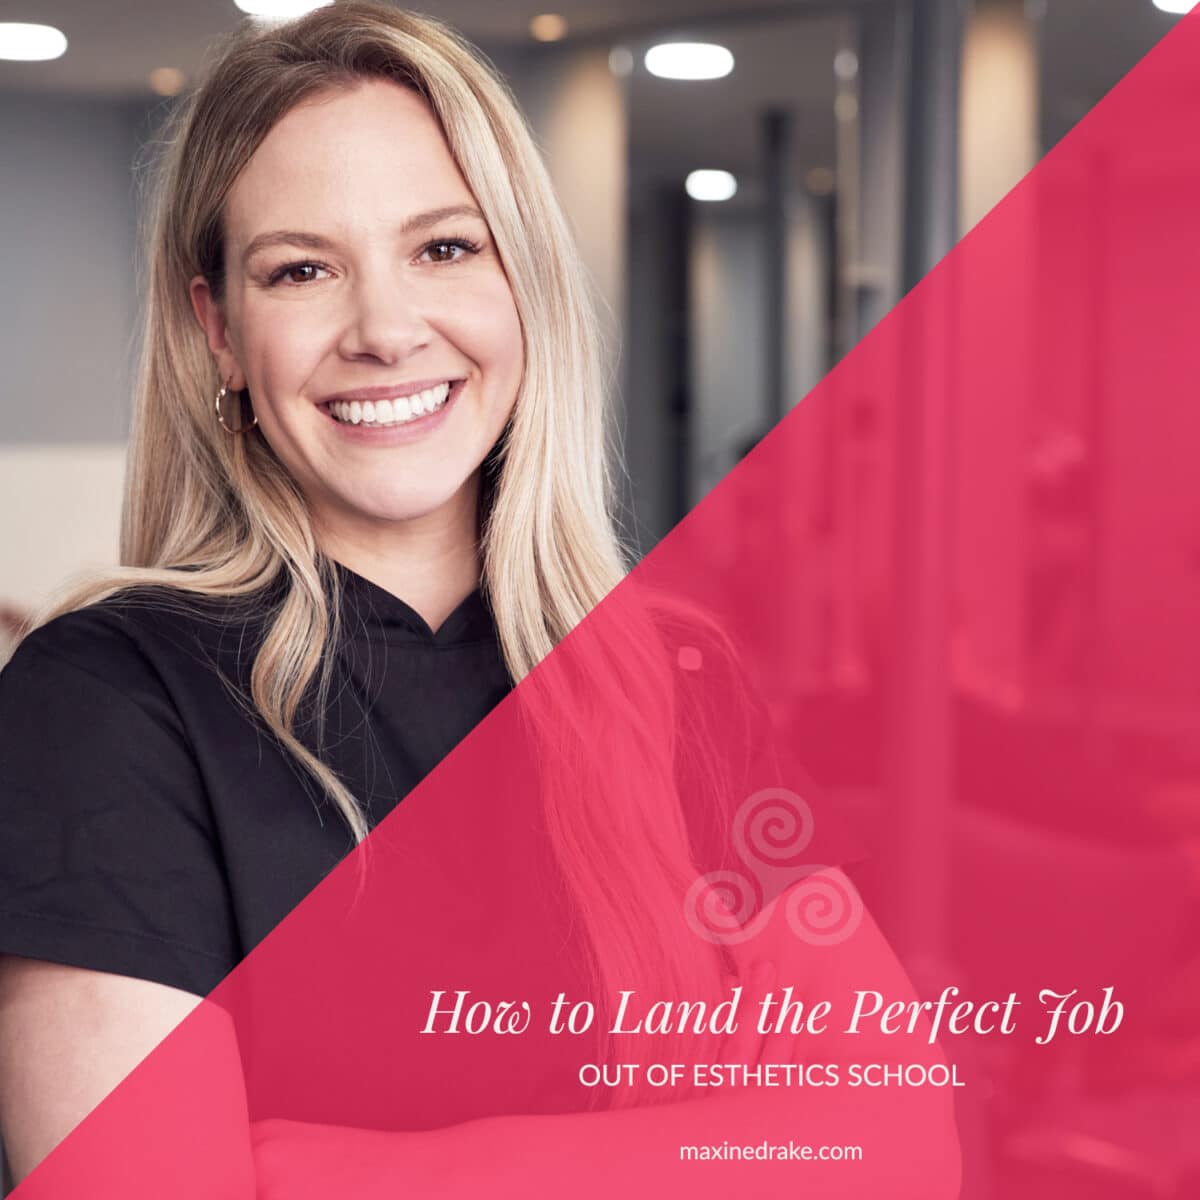 How To Land The Perfect Job out of Esthetics School - Maxine Drake Blog